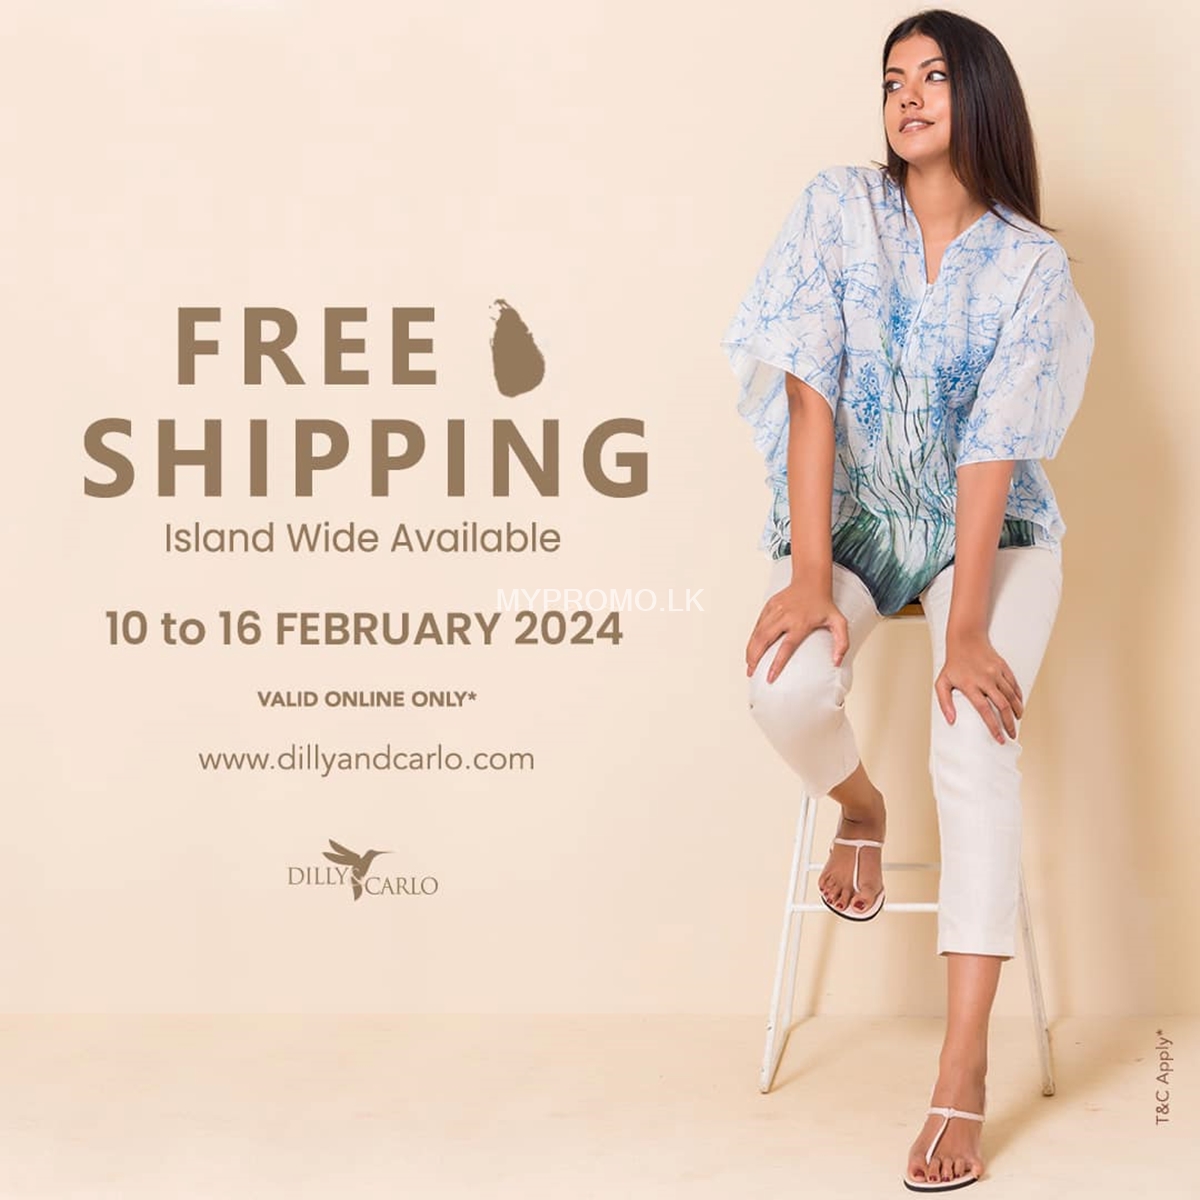 Enjoy free shipping on all orders at Dilly & Carlo